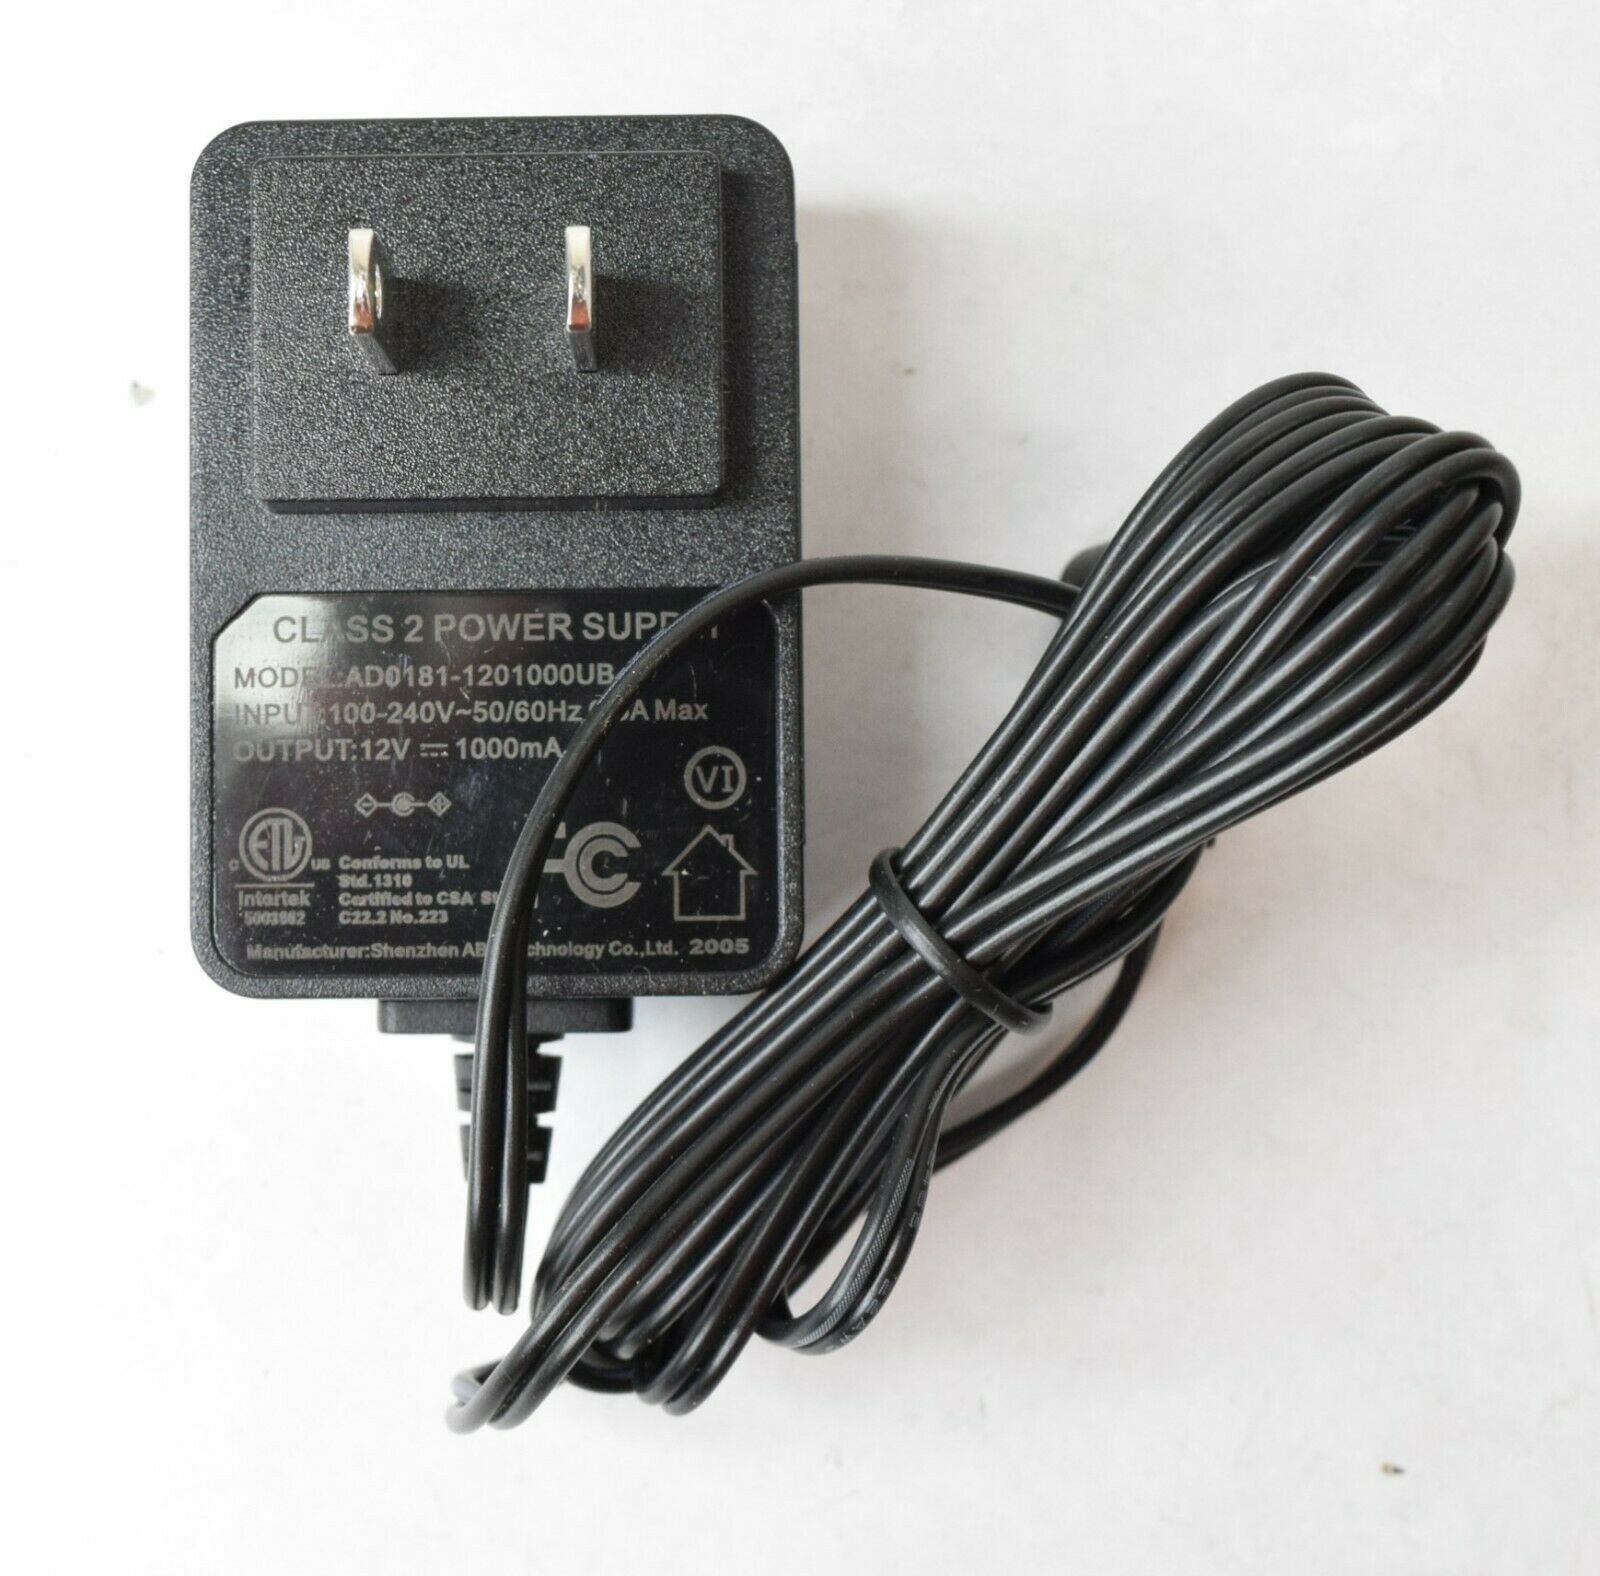 Shenzhen ABP Class 2 Power Supply Adapter Unit AD0181-1201000UB 12V 100mAh Type: Adapter Output Voltage: 12 V MPN: AD01